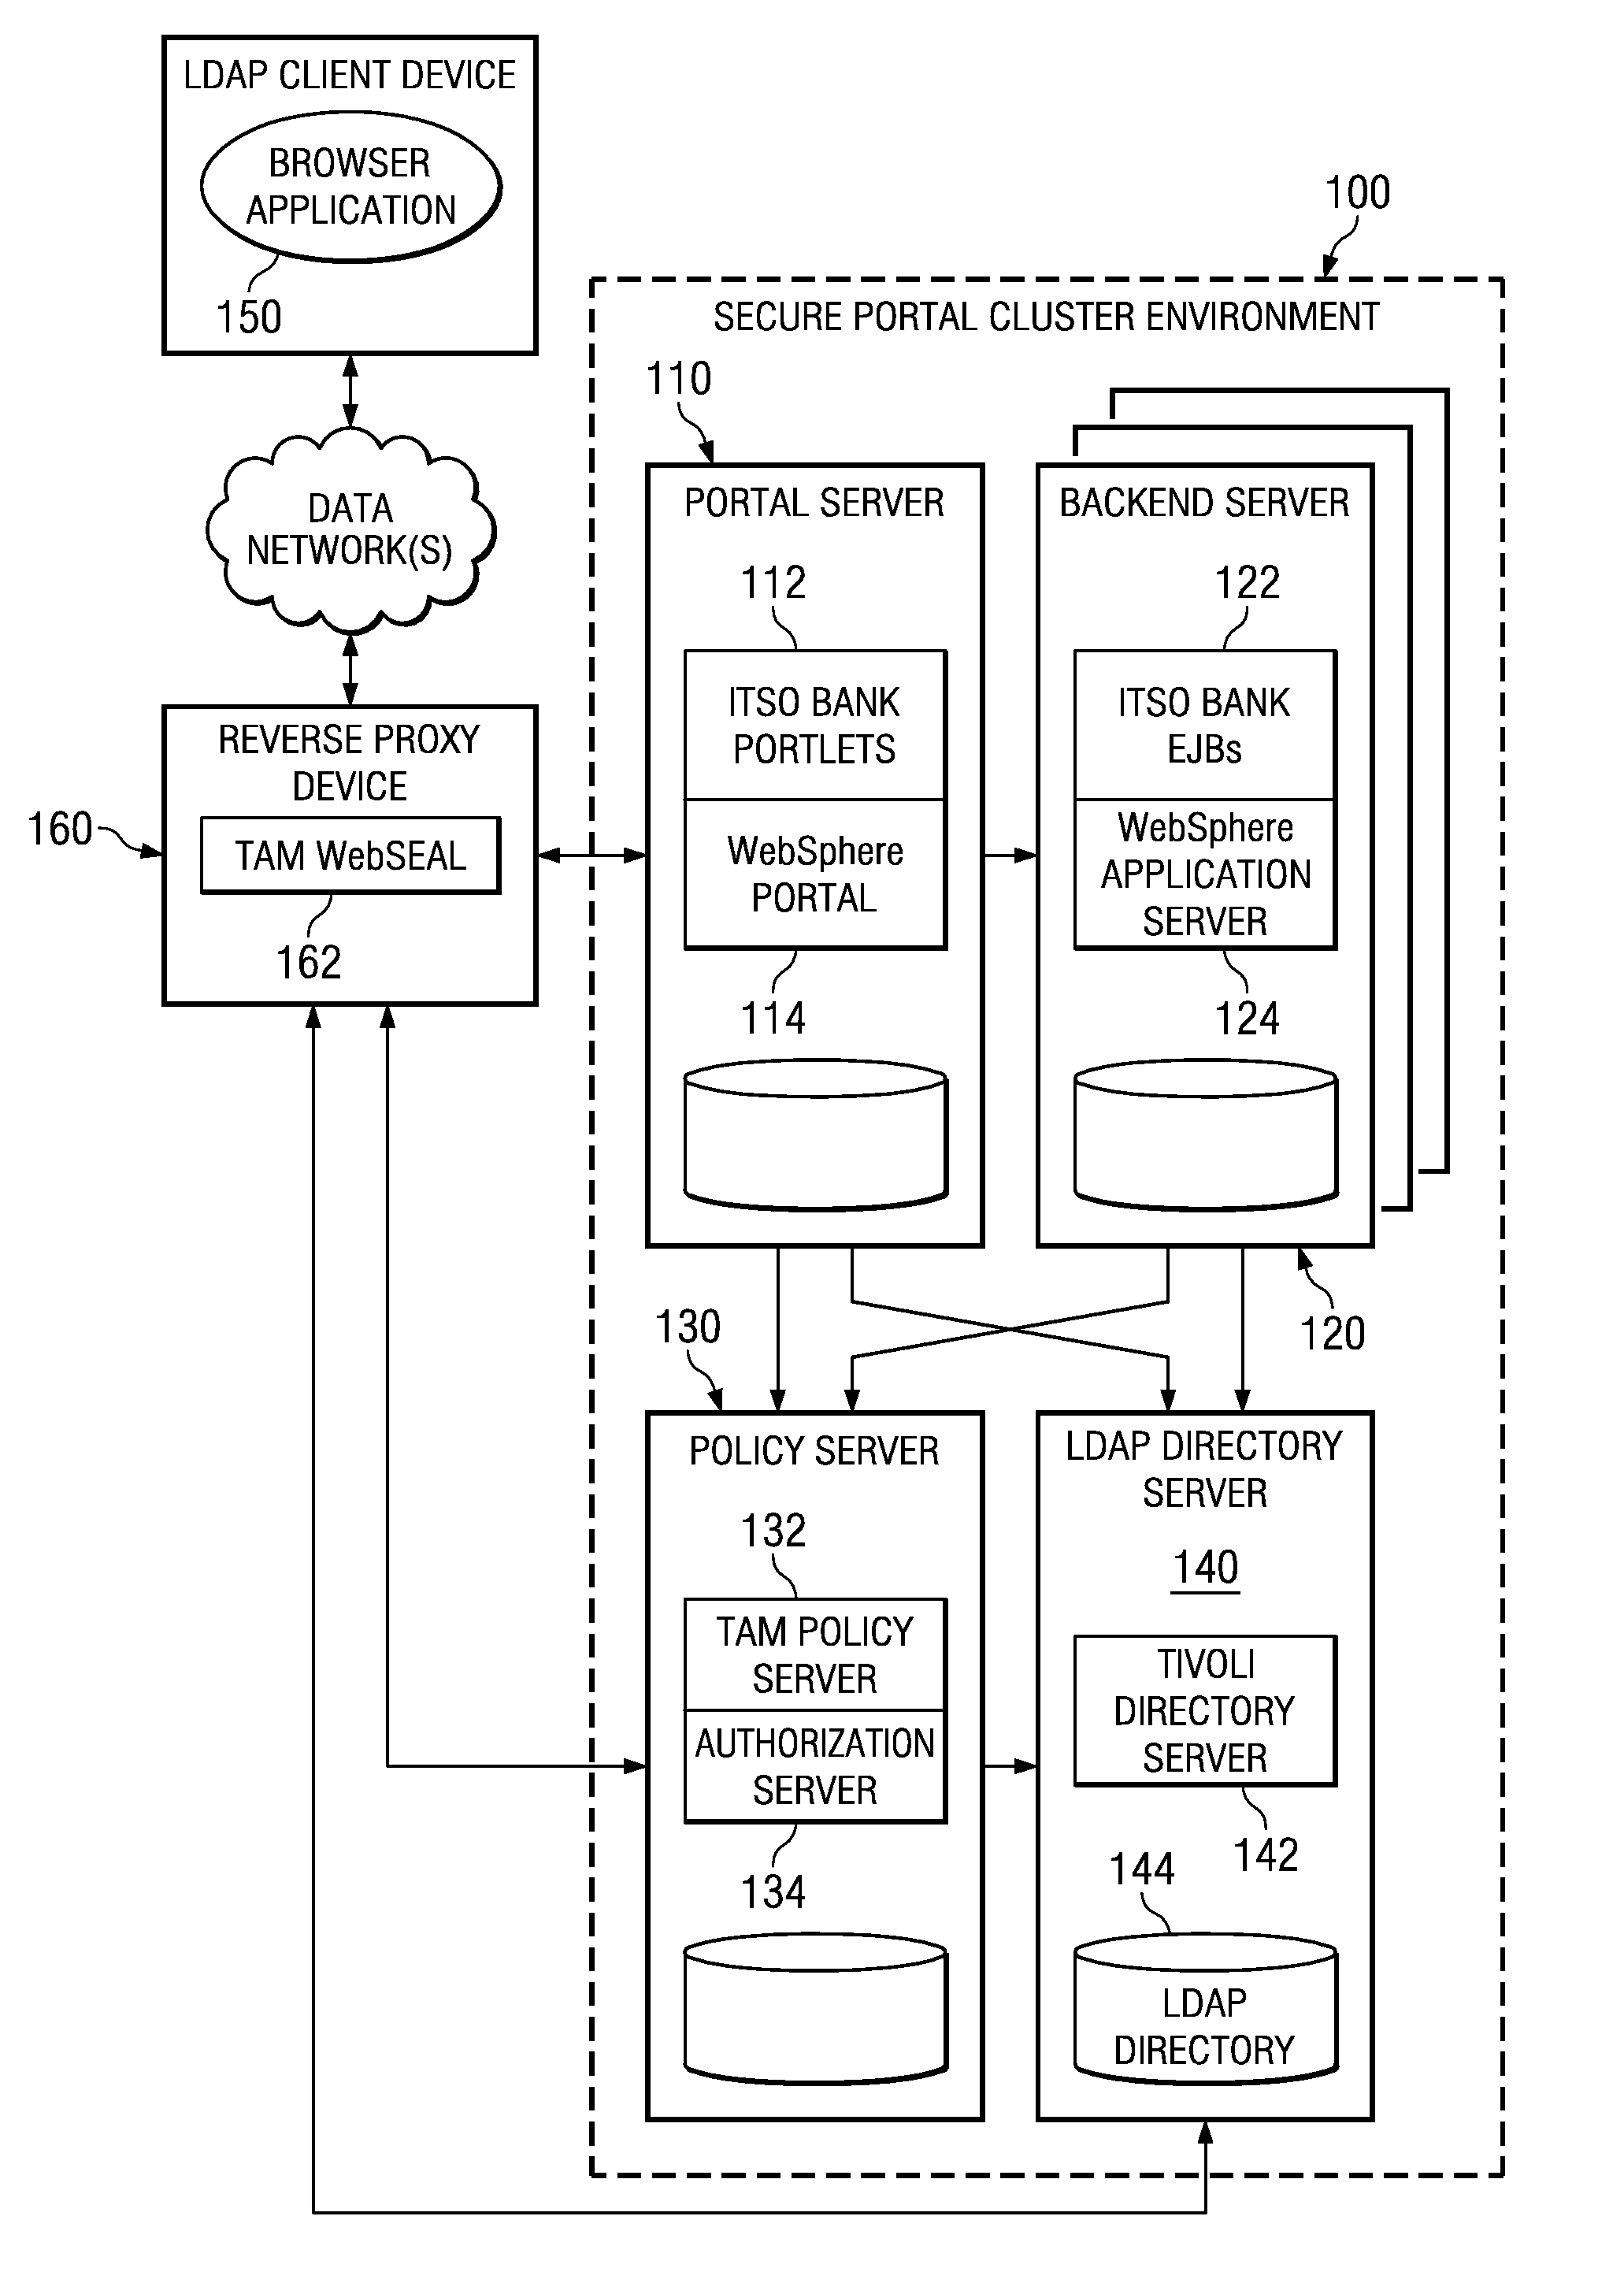 Apparatus and method for automatic response time measurement of ldap server operations